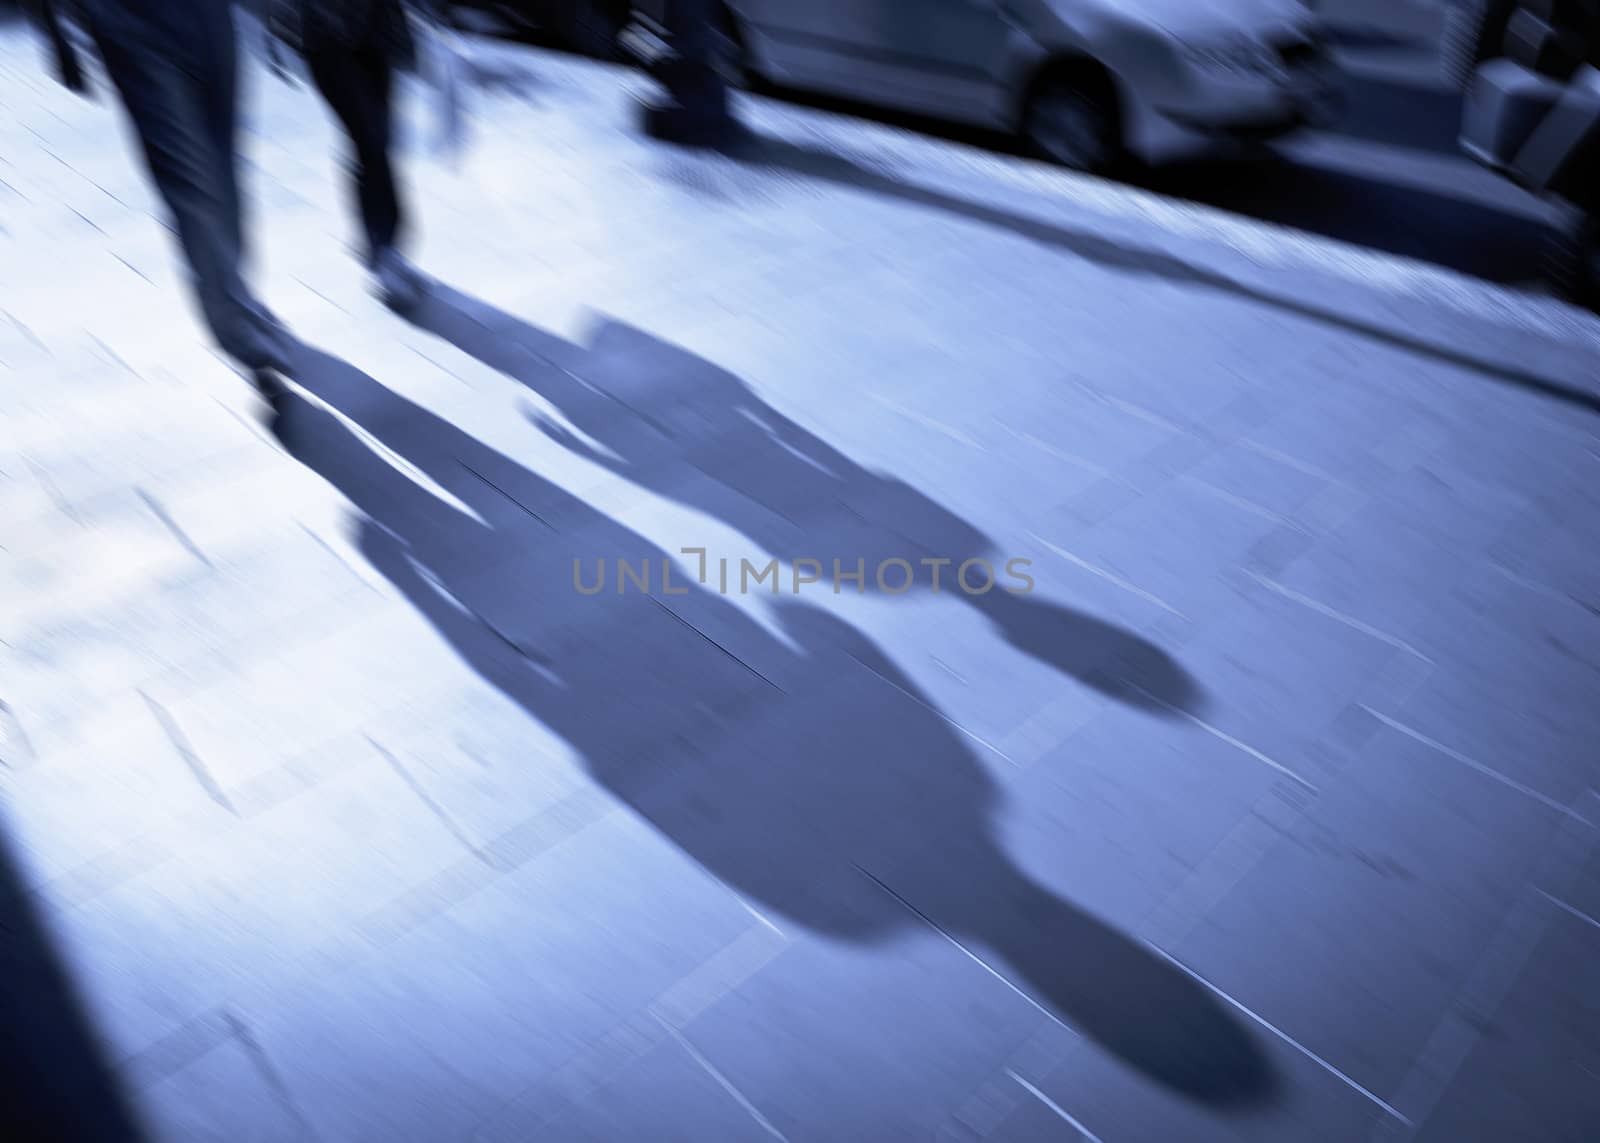 Conceptual image of a backlit couple on the move in the public room. Use your fantasi - make your story. Intentional motion blur.